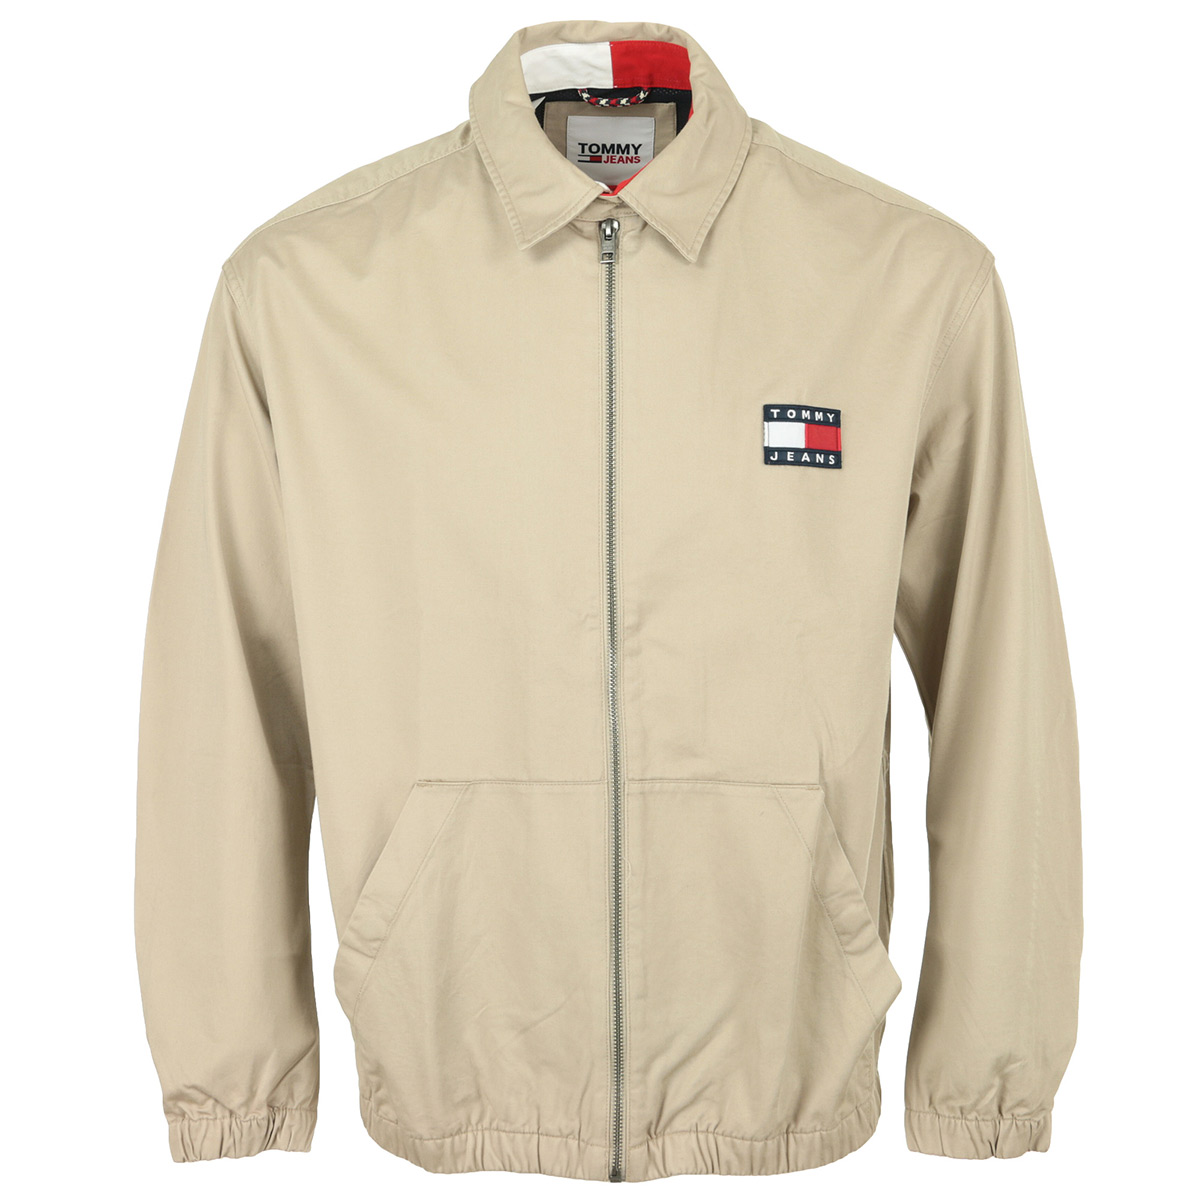 Tommy Hilfiger Casual Cotton Jacket